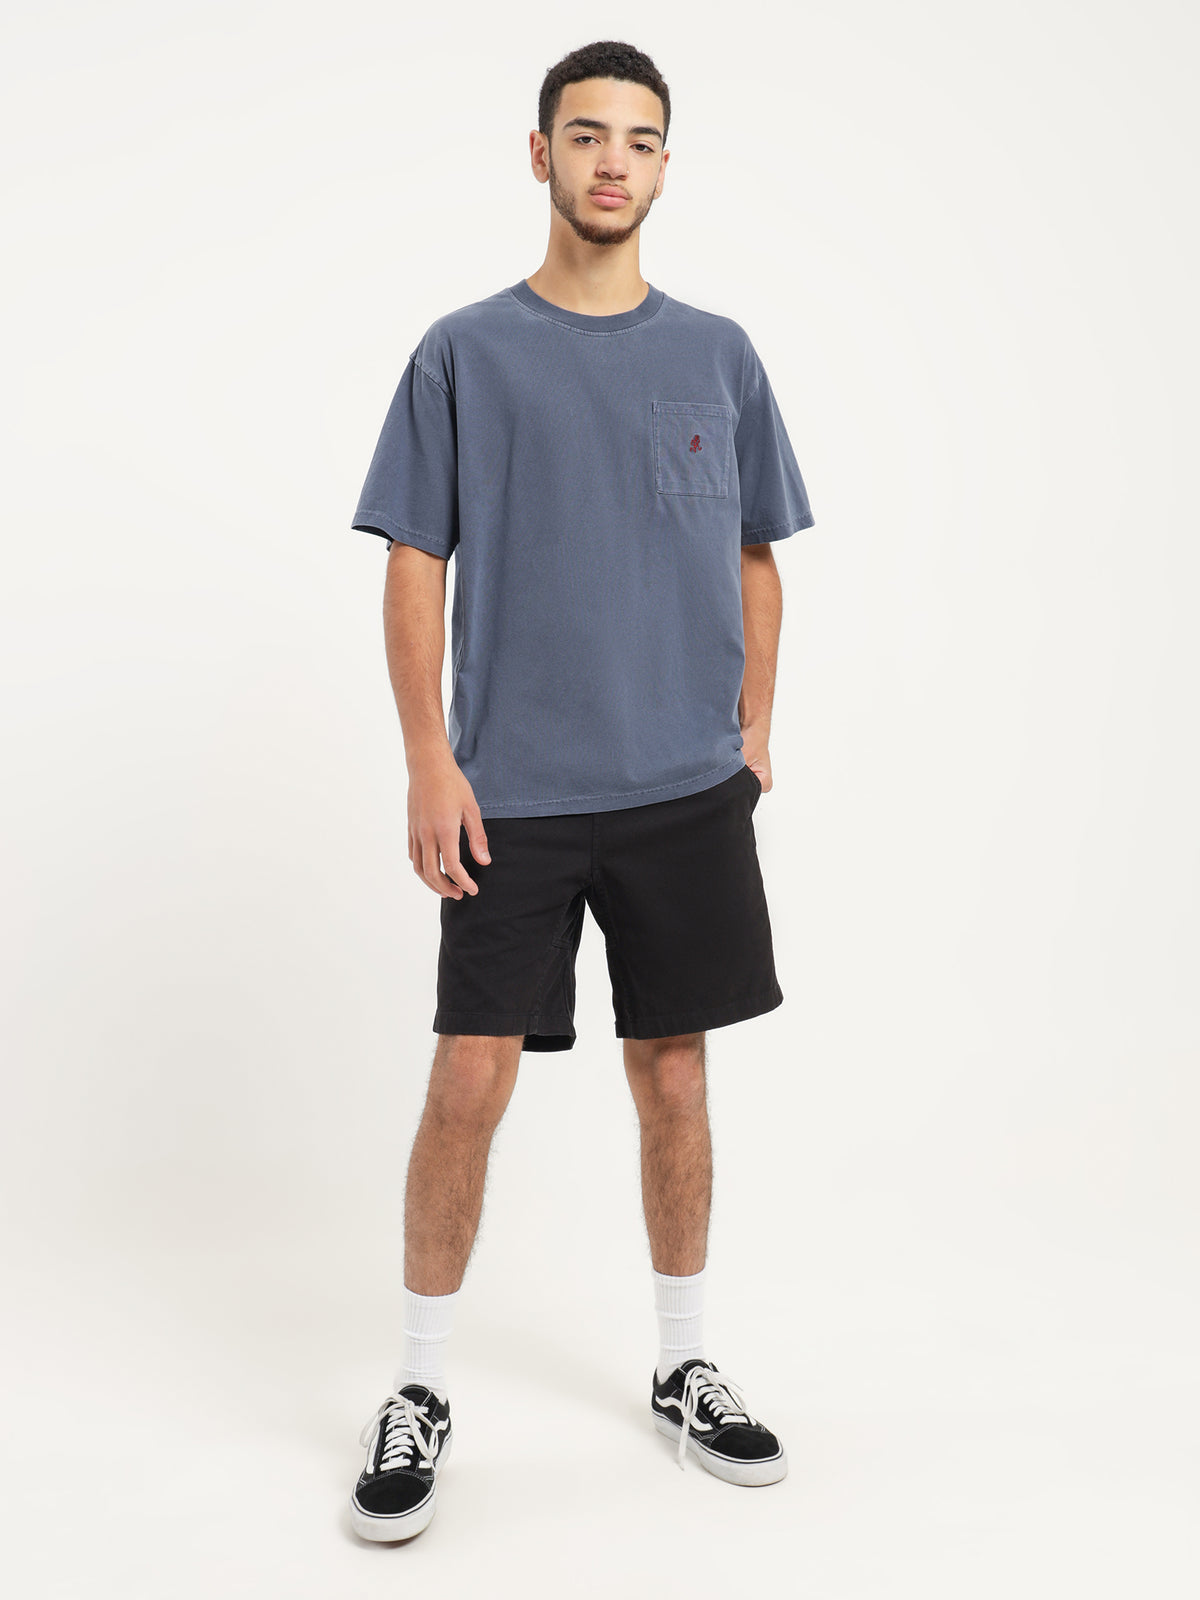 Gramicci One Point T-Shirt in Navy Pigment | Navy